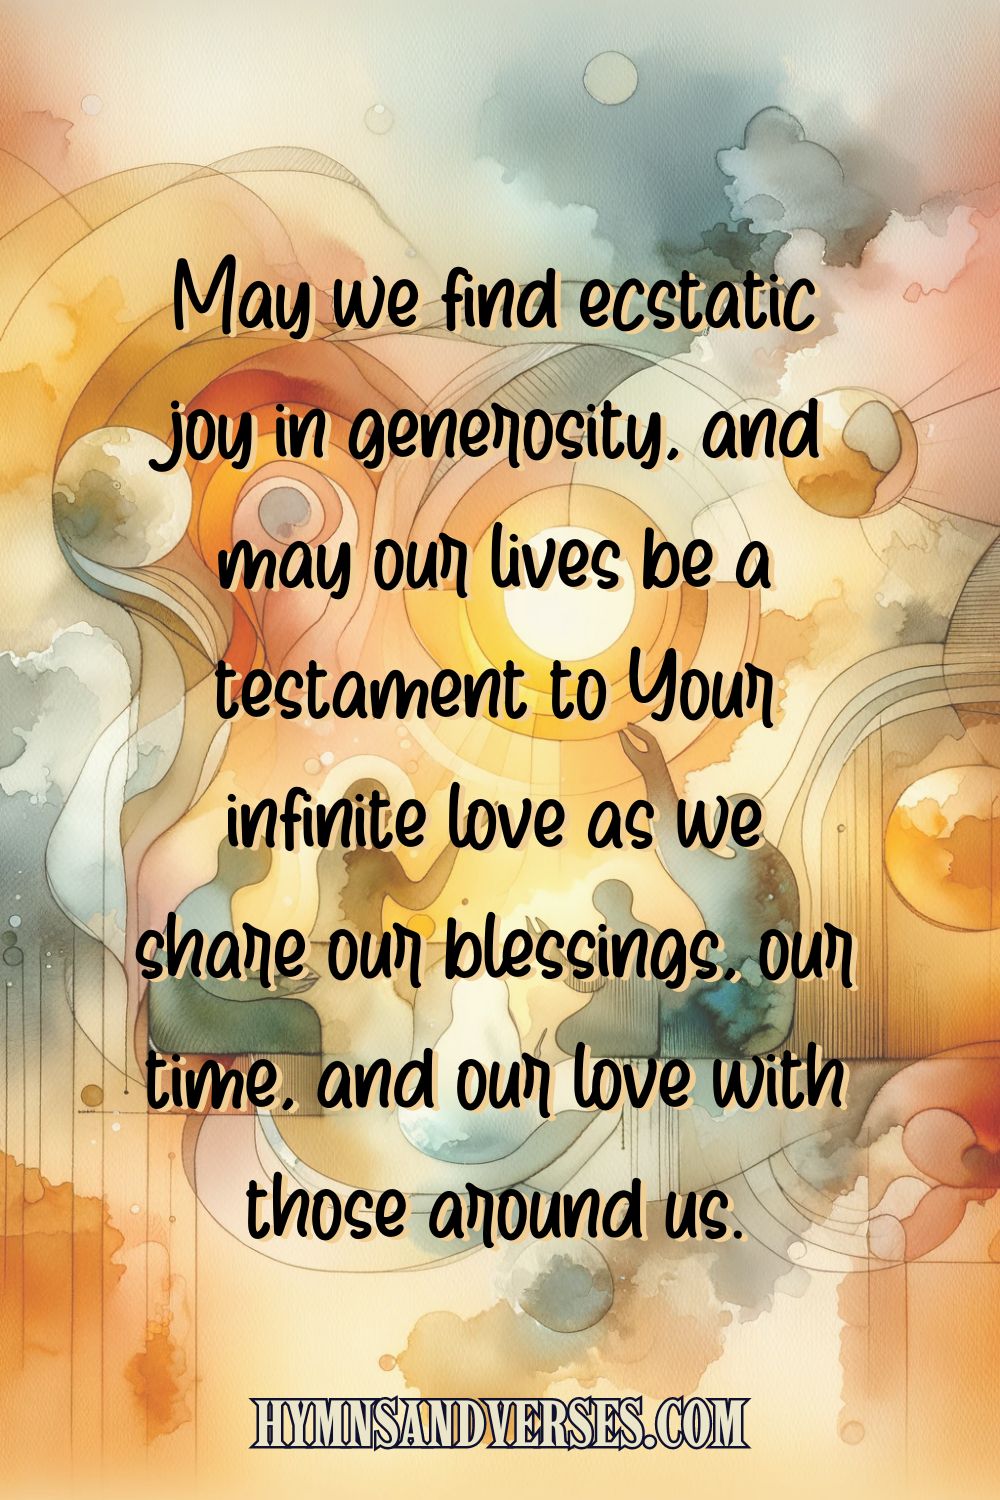 Pin image for post, a short prayer that reads: "May we find ecstatic joy in generosity, and may our lives be a testament to your infinite love as we share our blessings, our time, and our love with those around us."